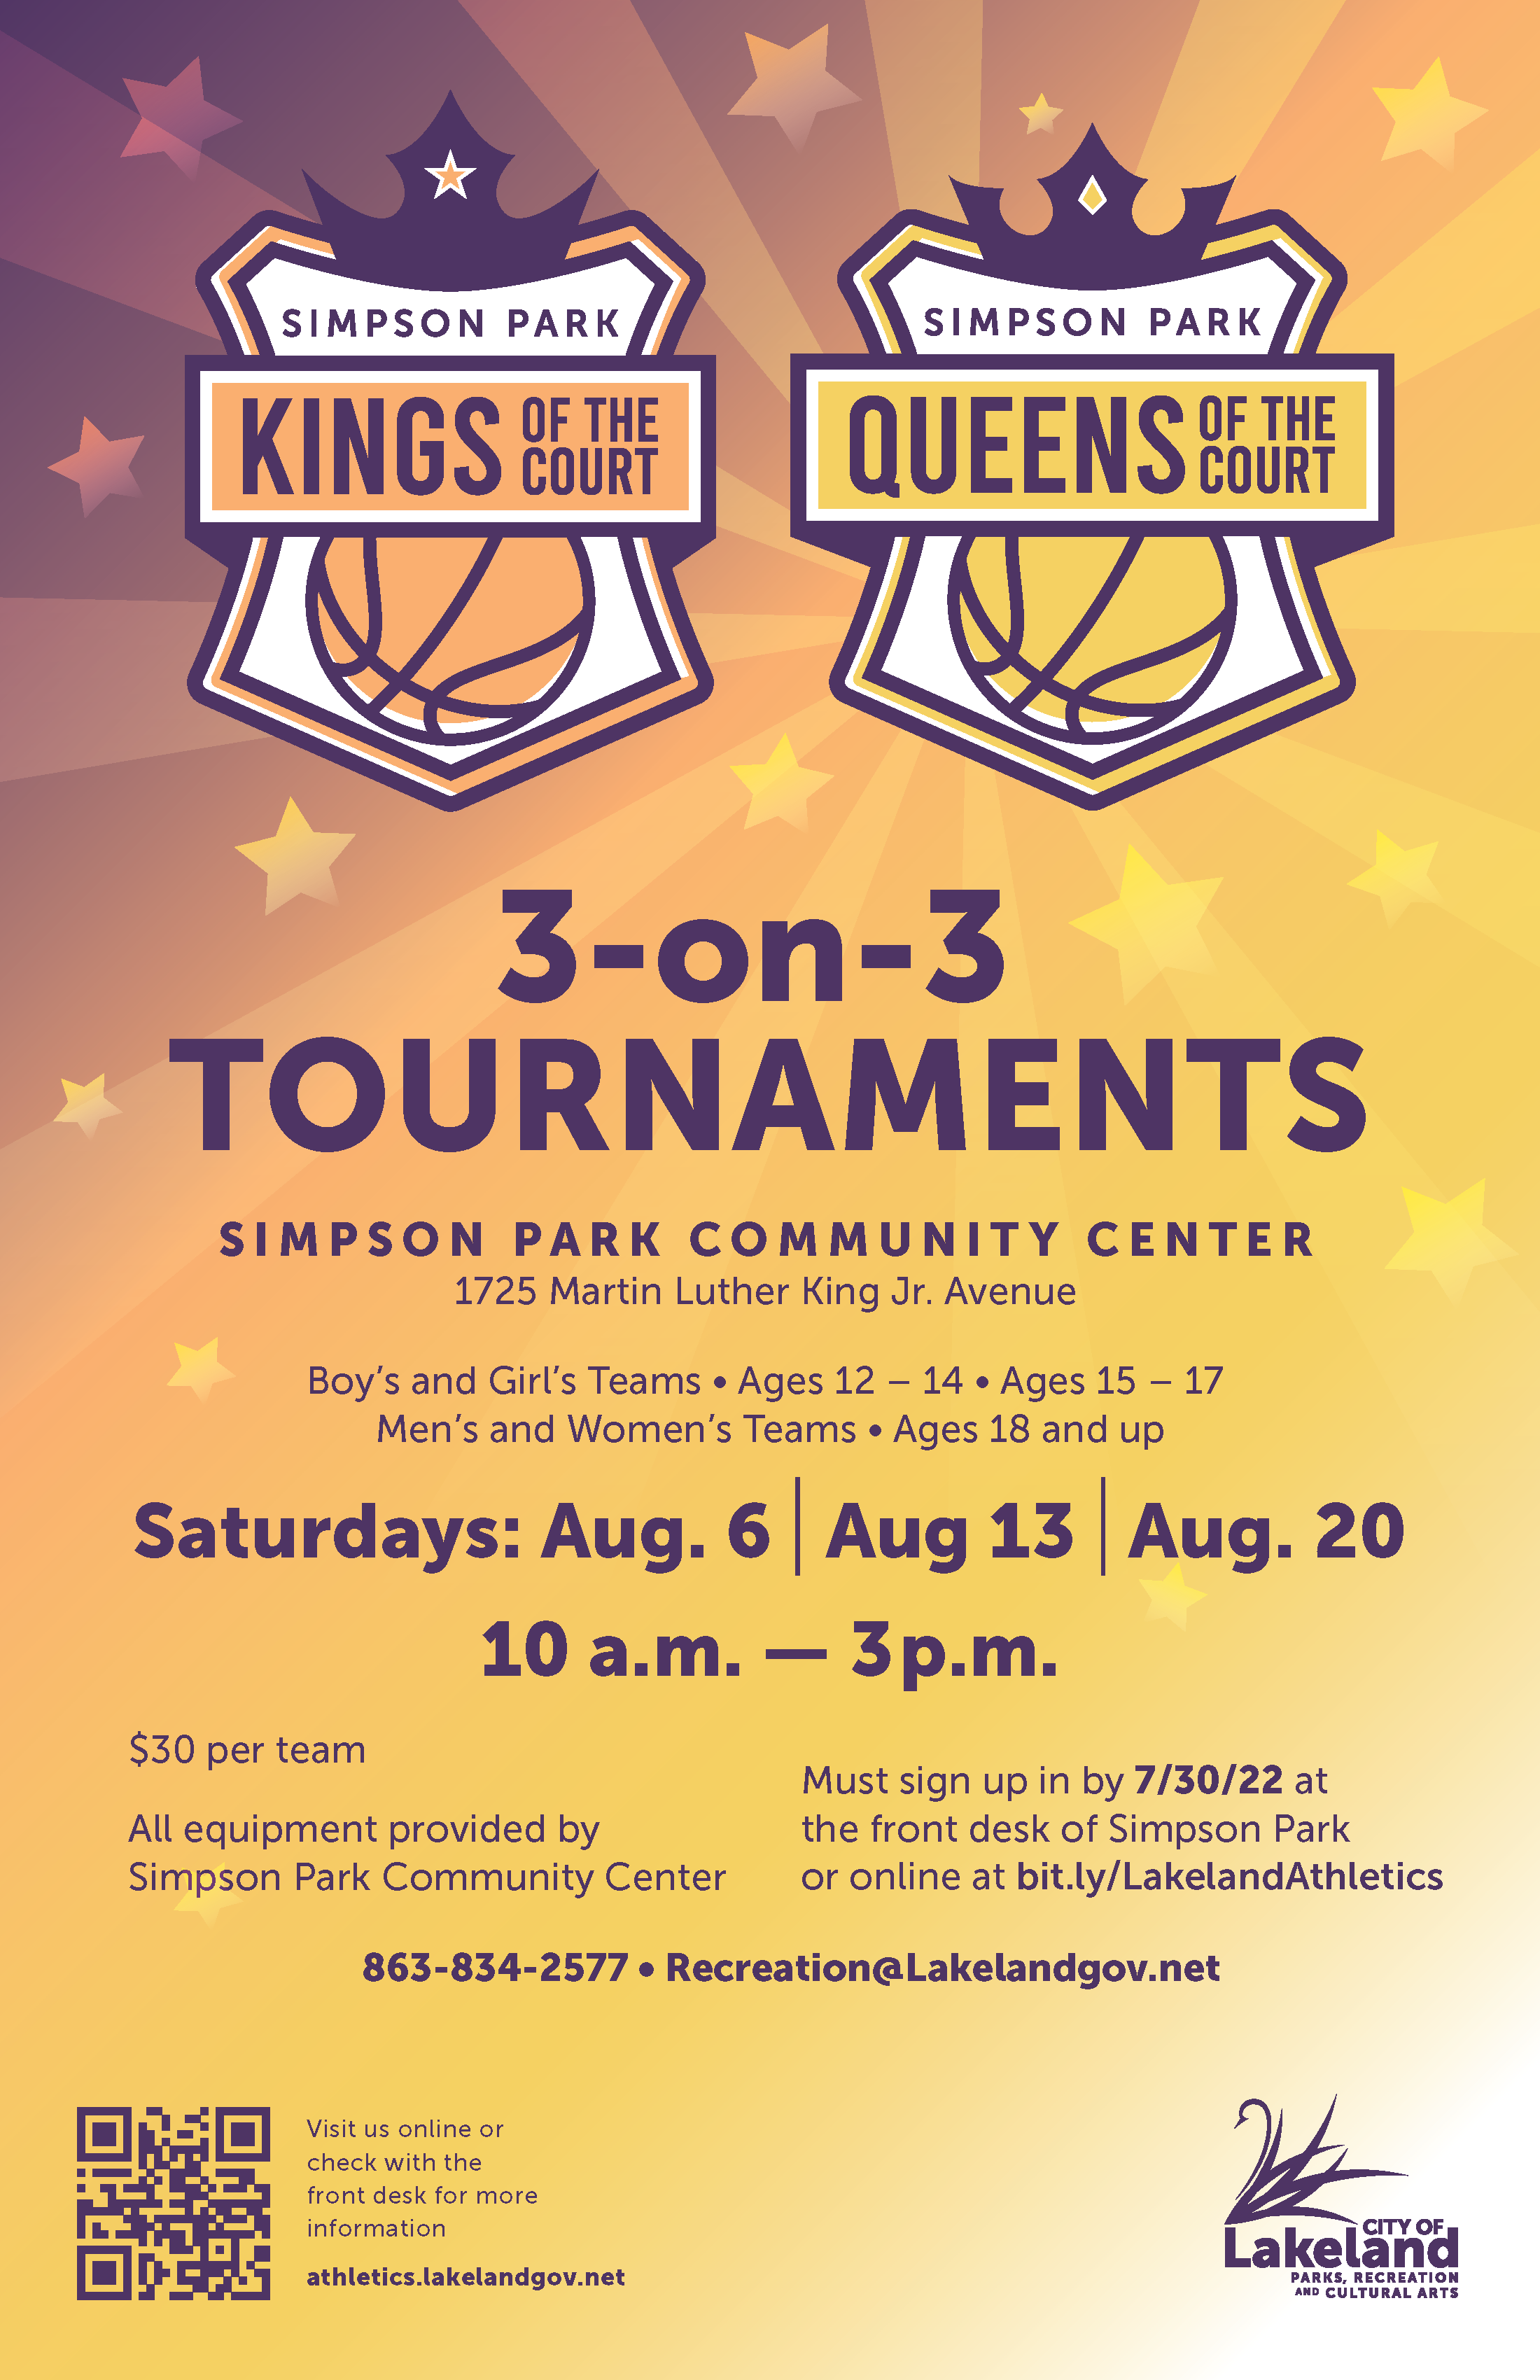 Kings & Queens Basketball Tournament - 3 on 3, register by 7/30 - Call 863-834-2577 for more info.